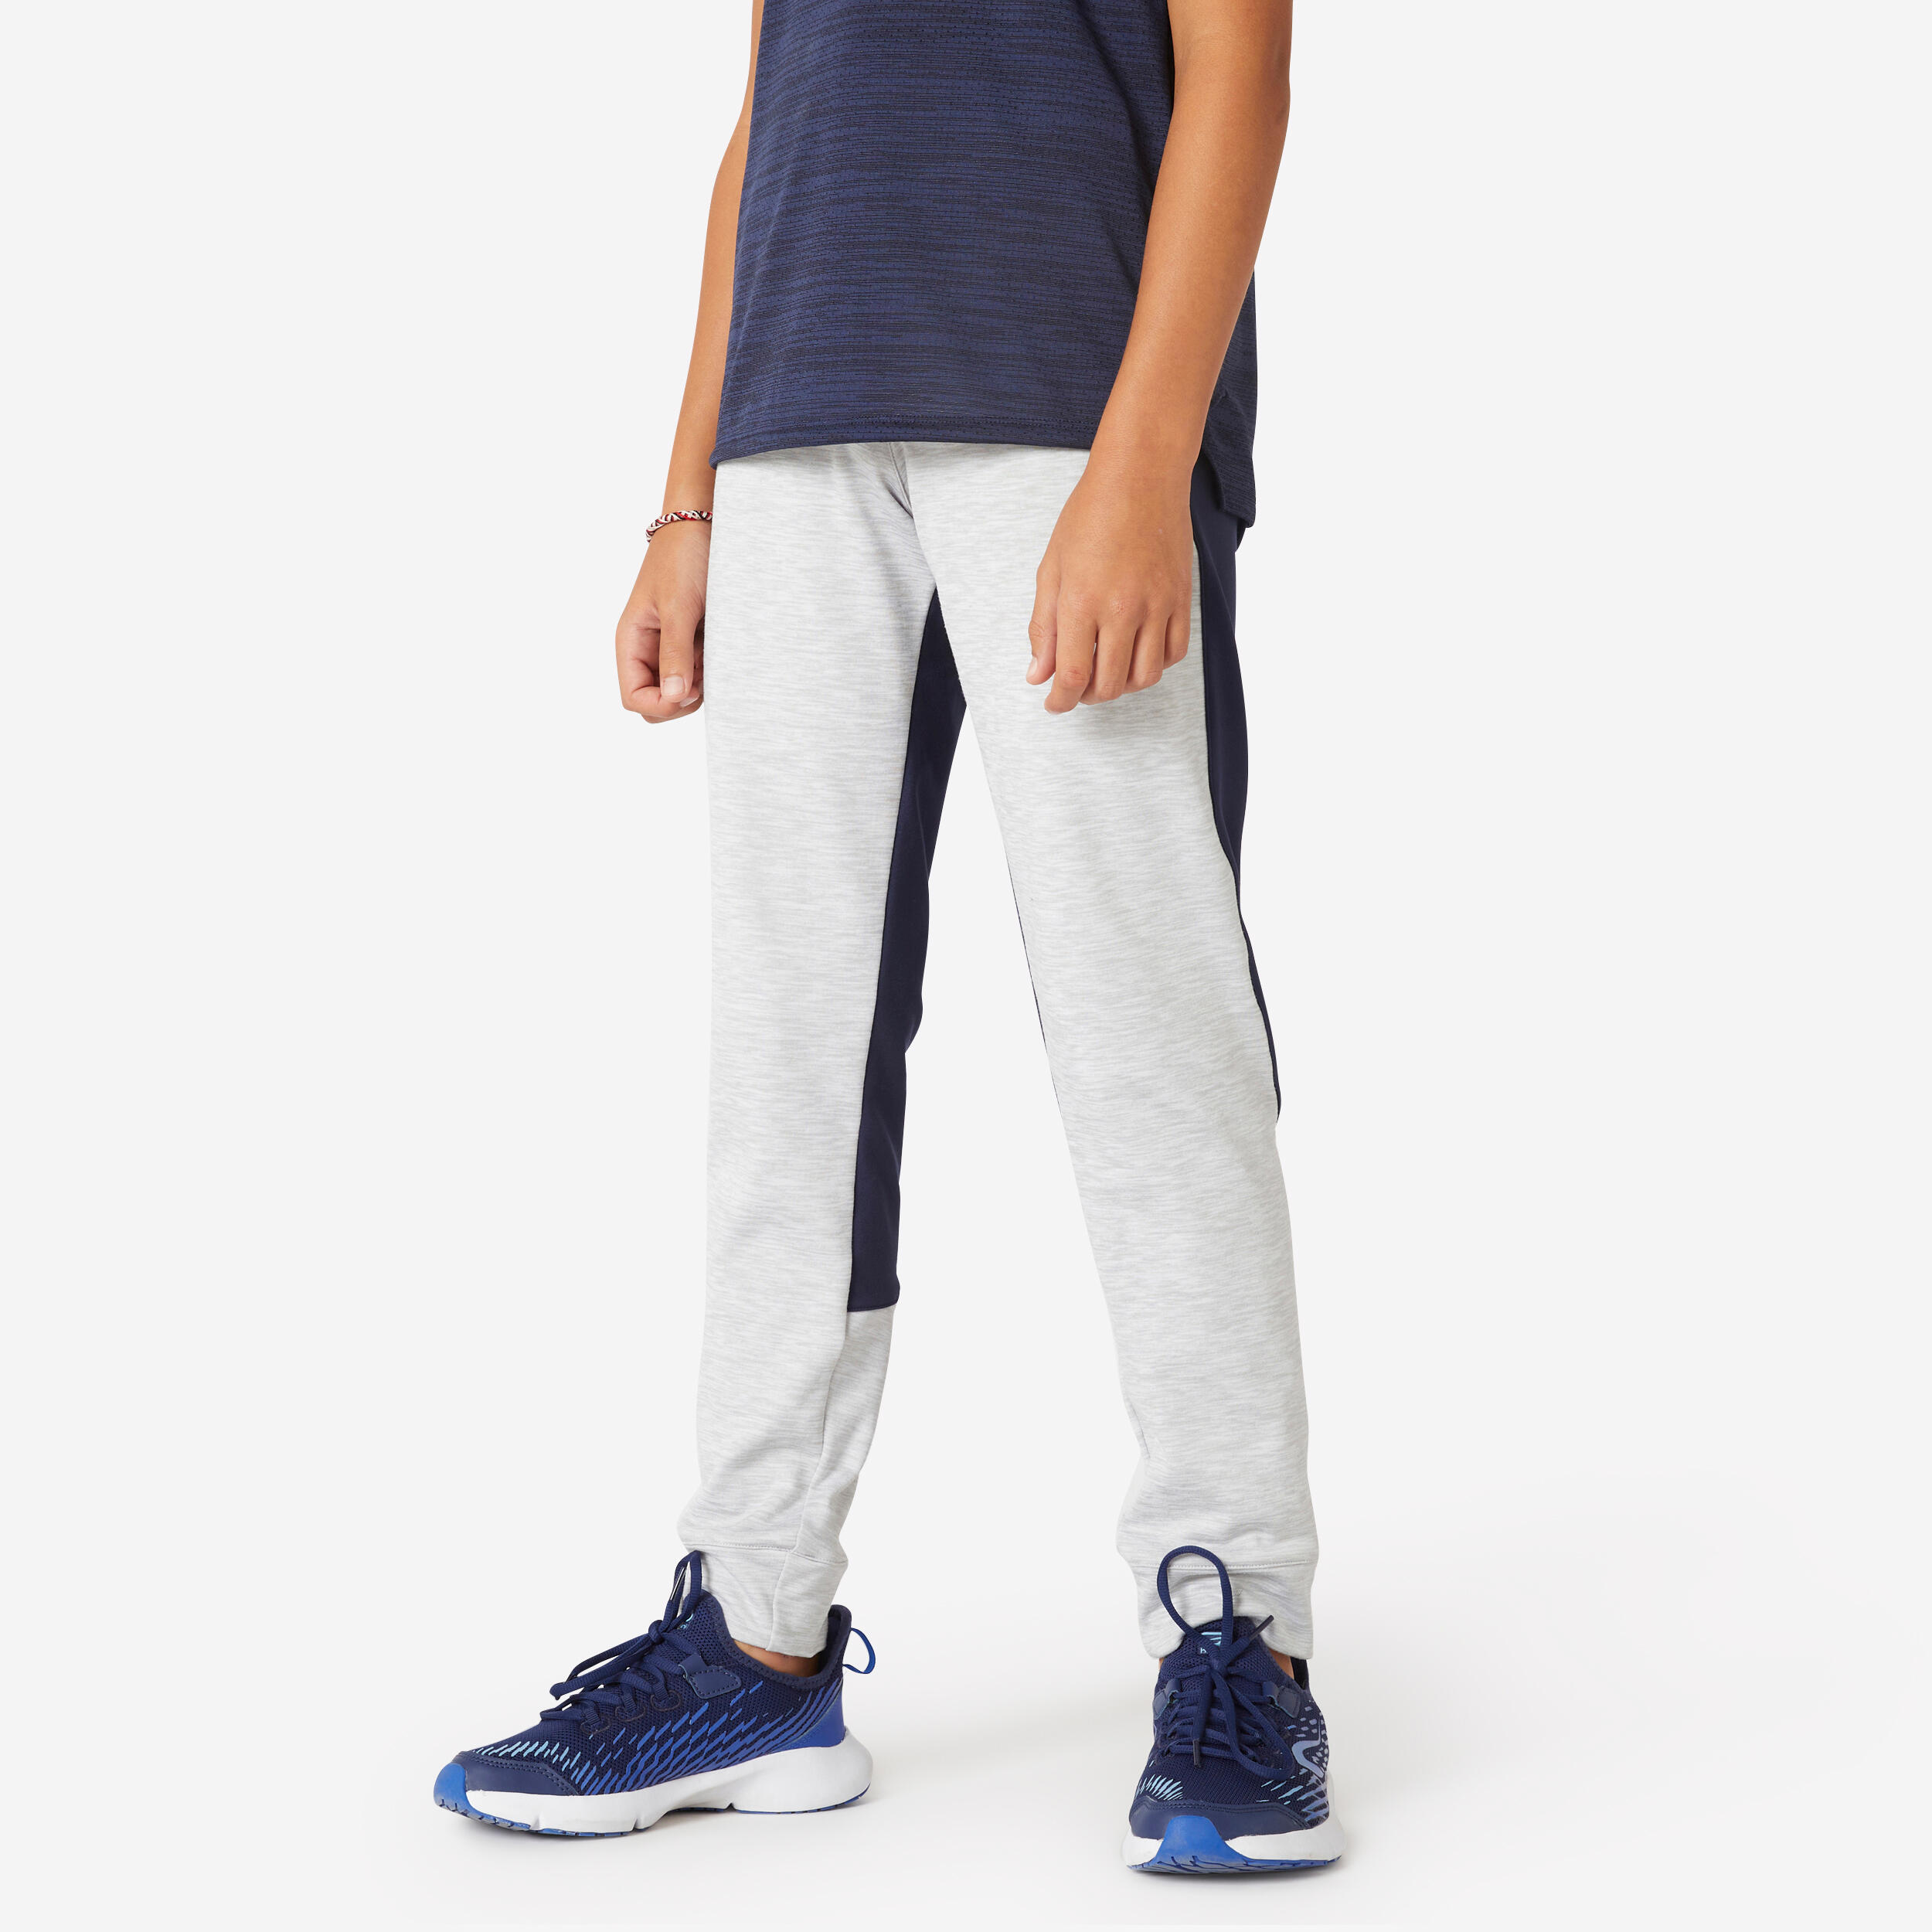 DOMYOS Kids' Warm and Breathable Jogging Bottoms